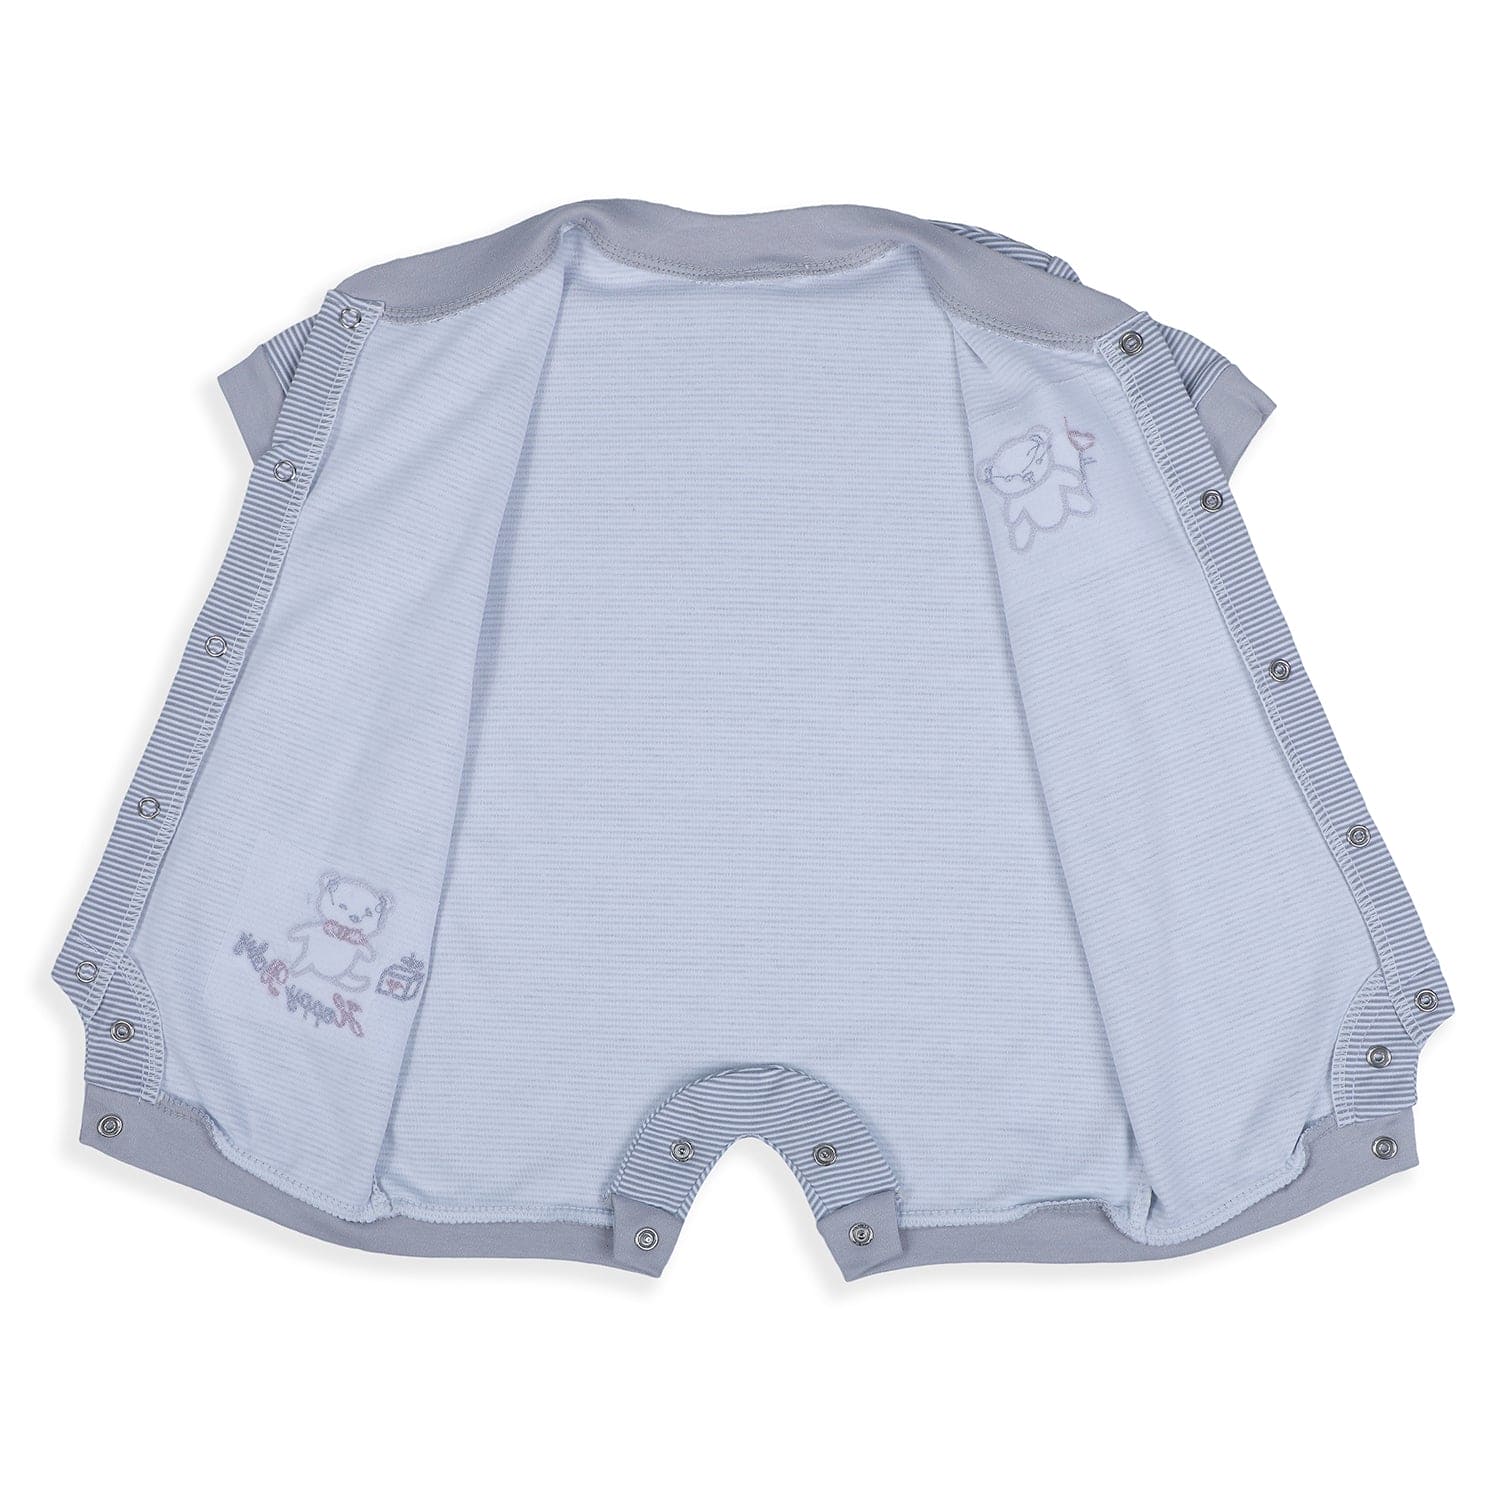 Baby Moo Happy Teddy Embroidered Soft Cotton Short Romper - Grey - Baby Moo